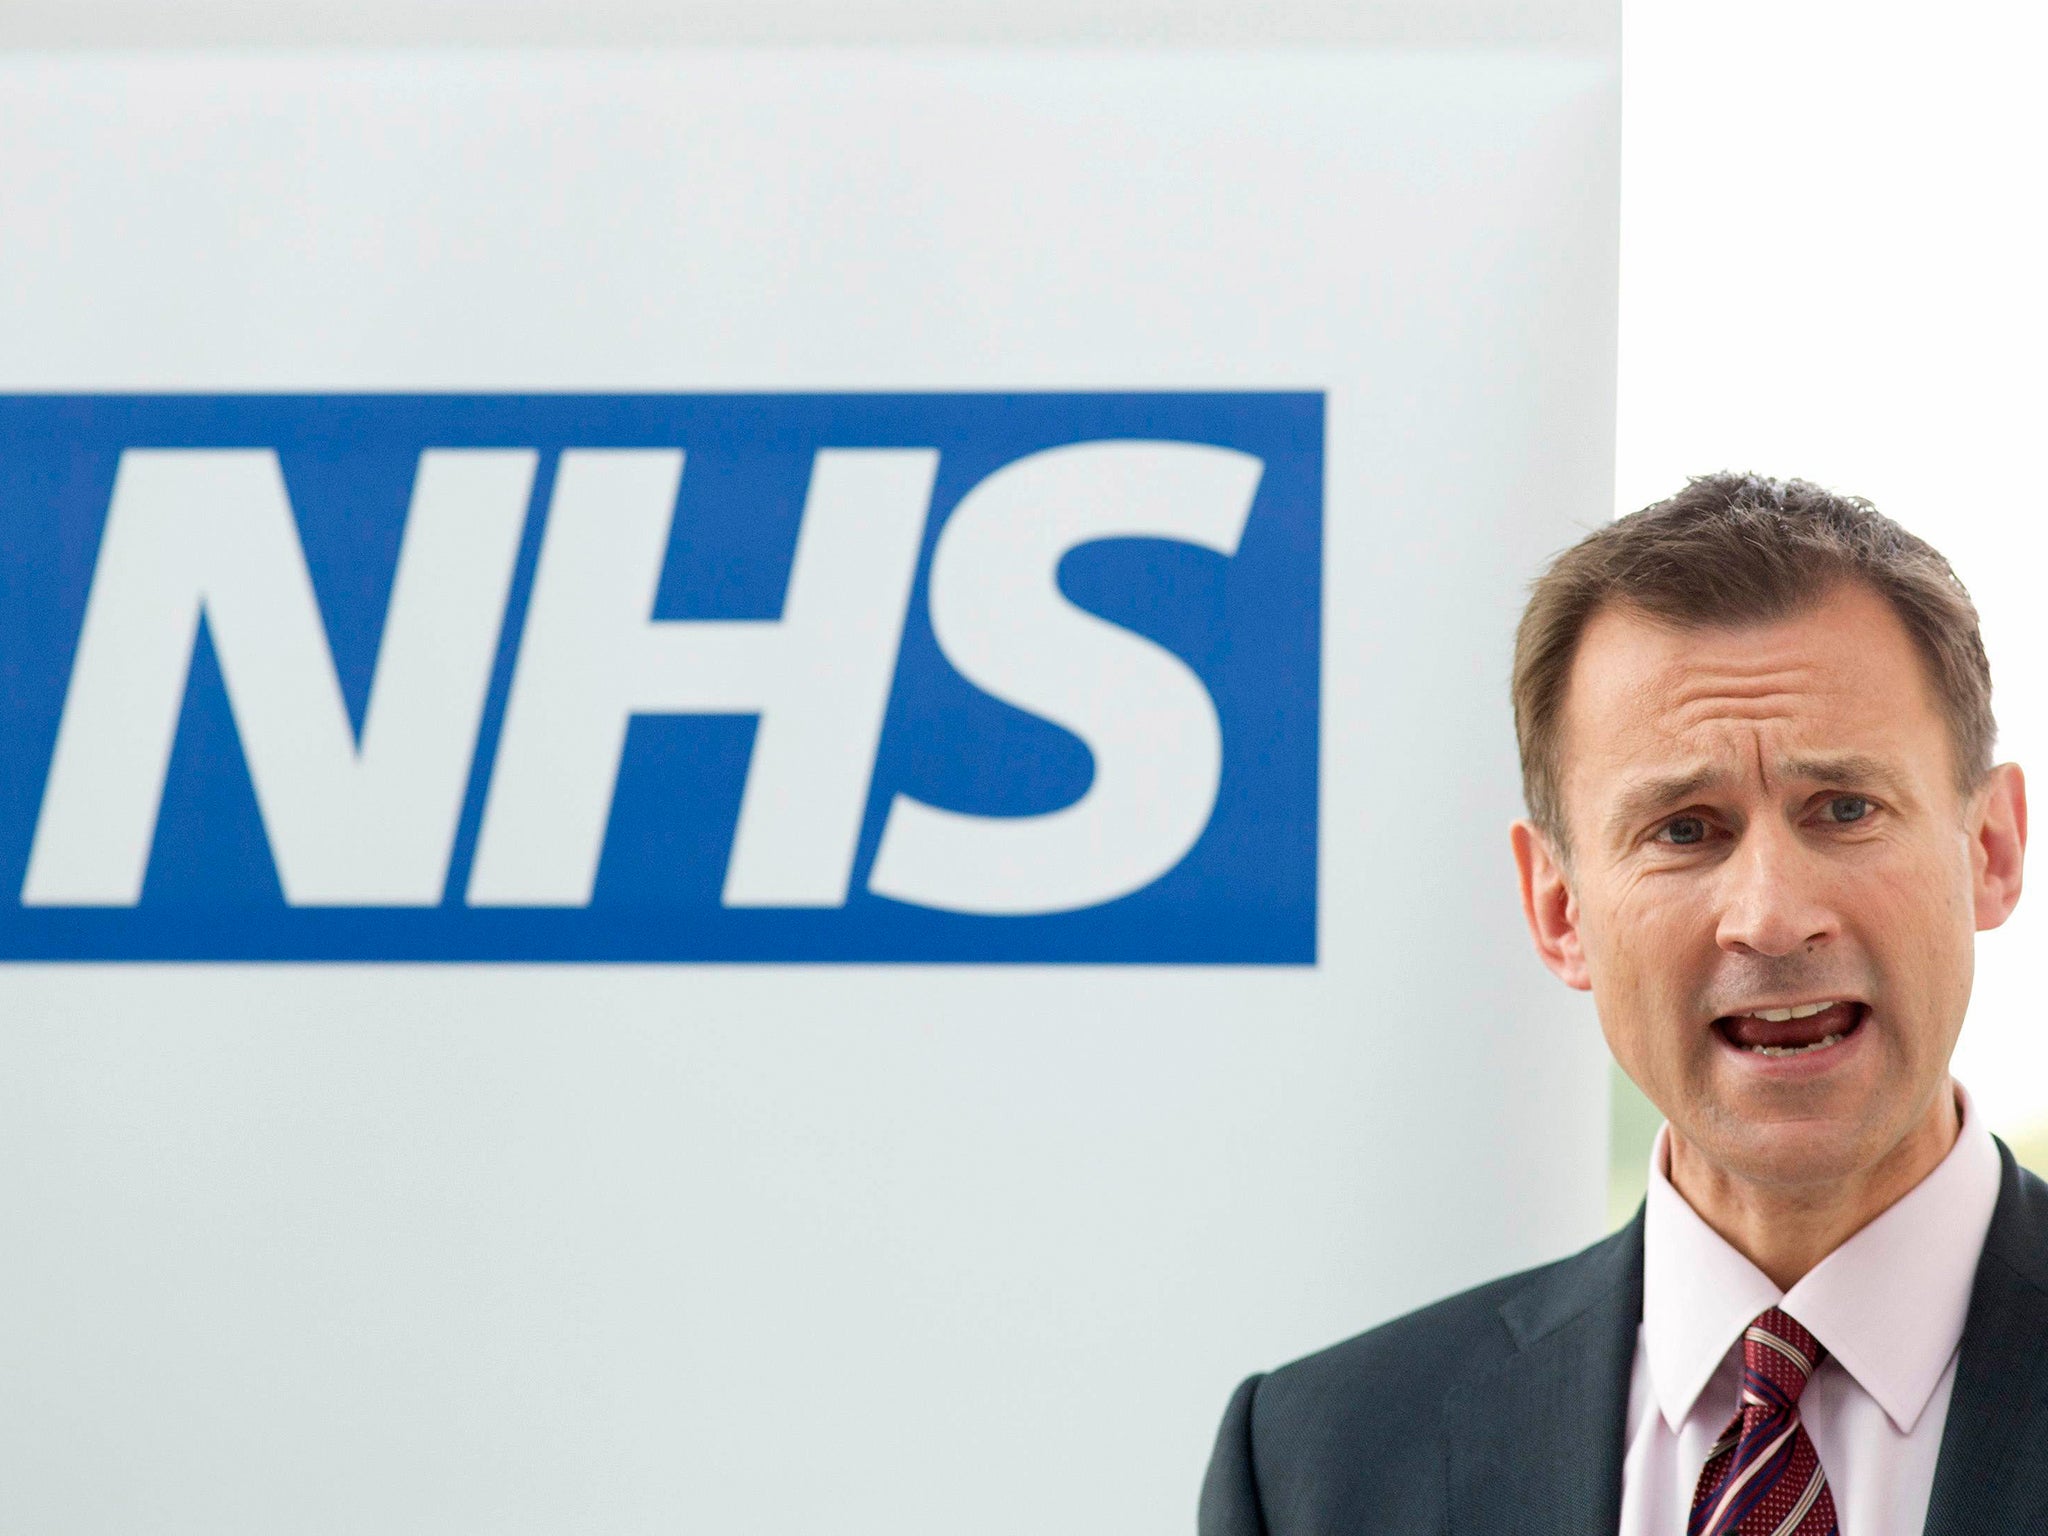 Jeremy Hunt, the Health Secretary, has written a letter to NHS trusts, which was leaked to the Telegraph, saying that managers on short-term contracts should not receive more than the pay given to permanent staff